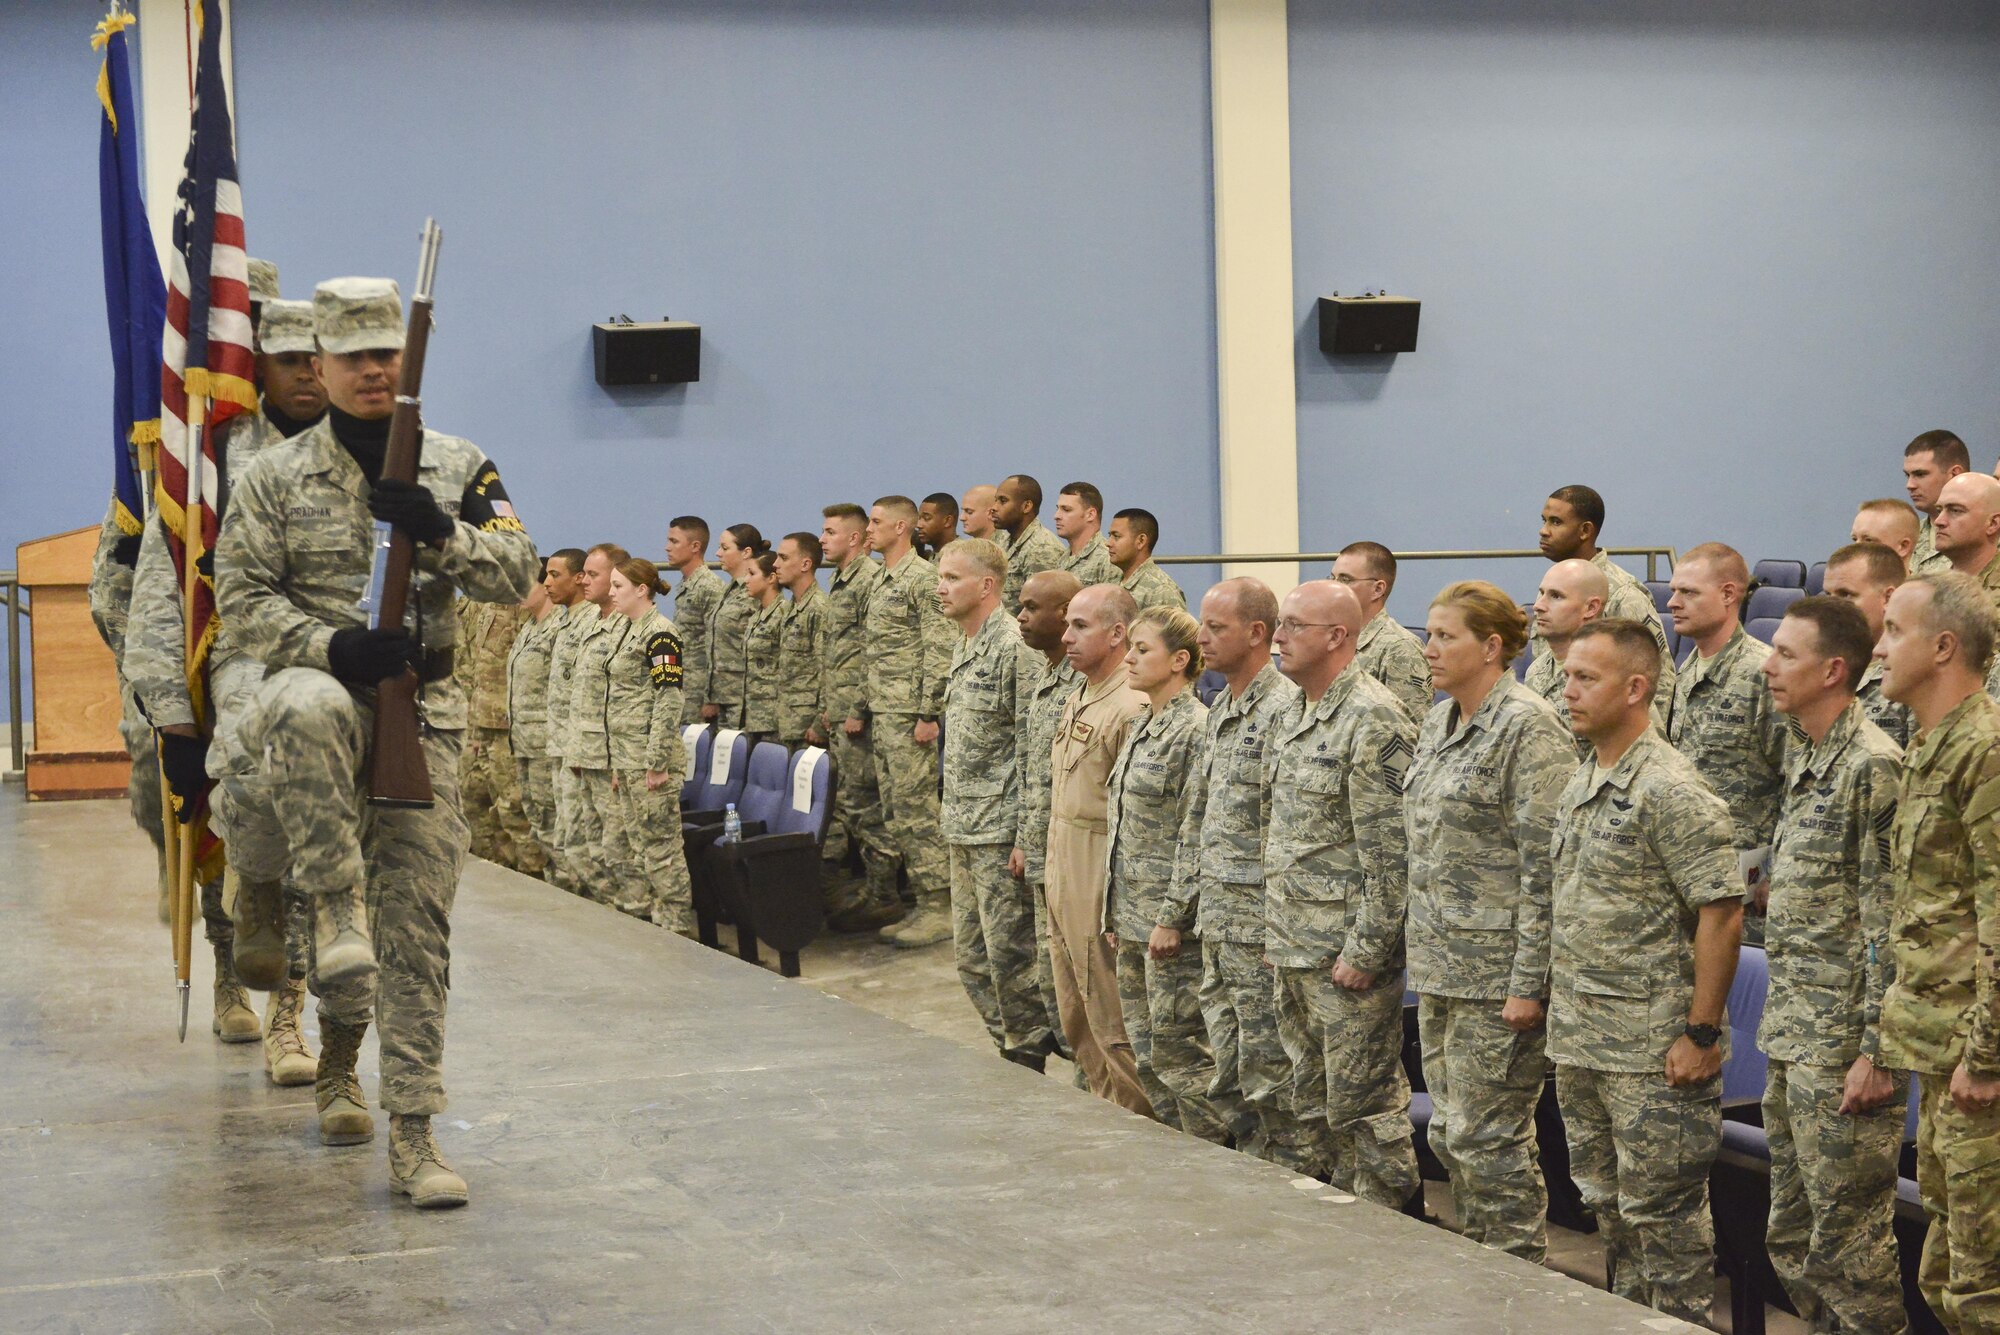 Al Udeid Honor Guardsman presents the colors during a Community College of the Air Force recognition ceremony April 28, 2015, at the Blatchford-Preston Complex theater Al Udeid Air Base, Qatar. Honor Guard is a volunteer program here that allows service members of all branches to perform during base ceremonies and events. (U.S. Air Force photo/Staff Sgt. Alexandre Montes)